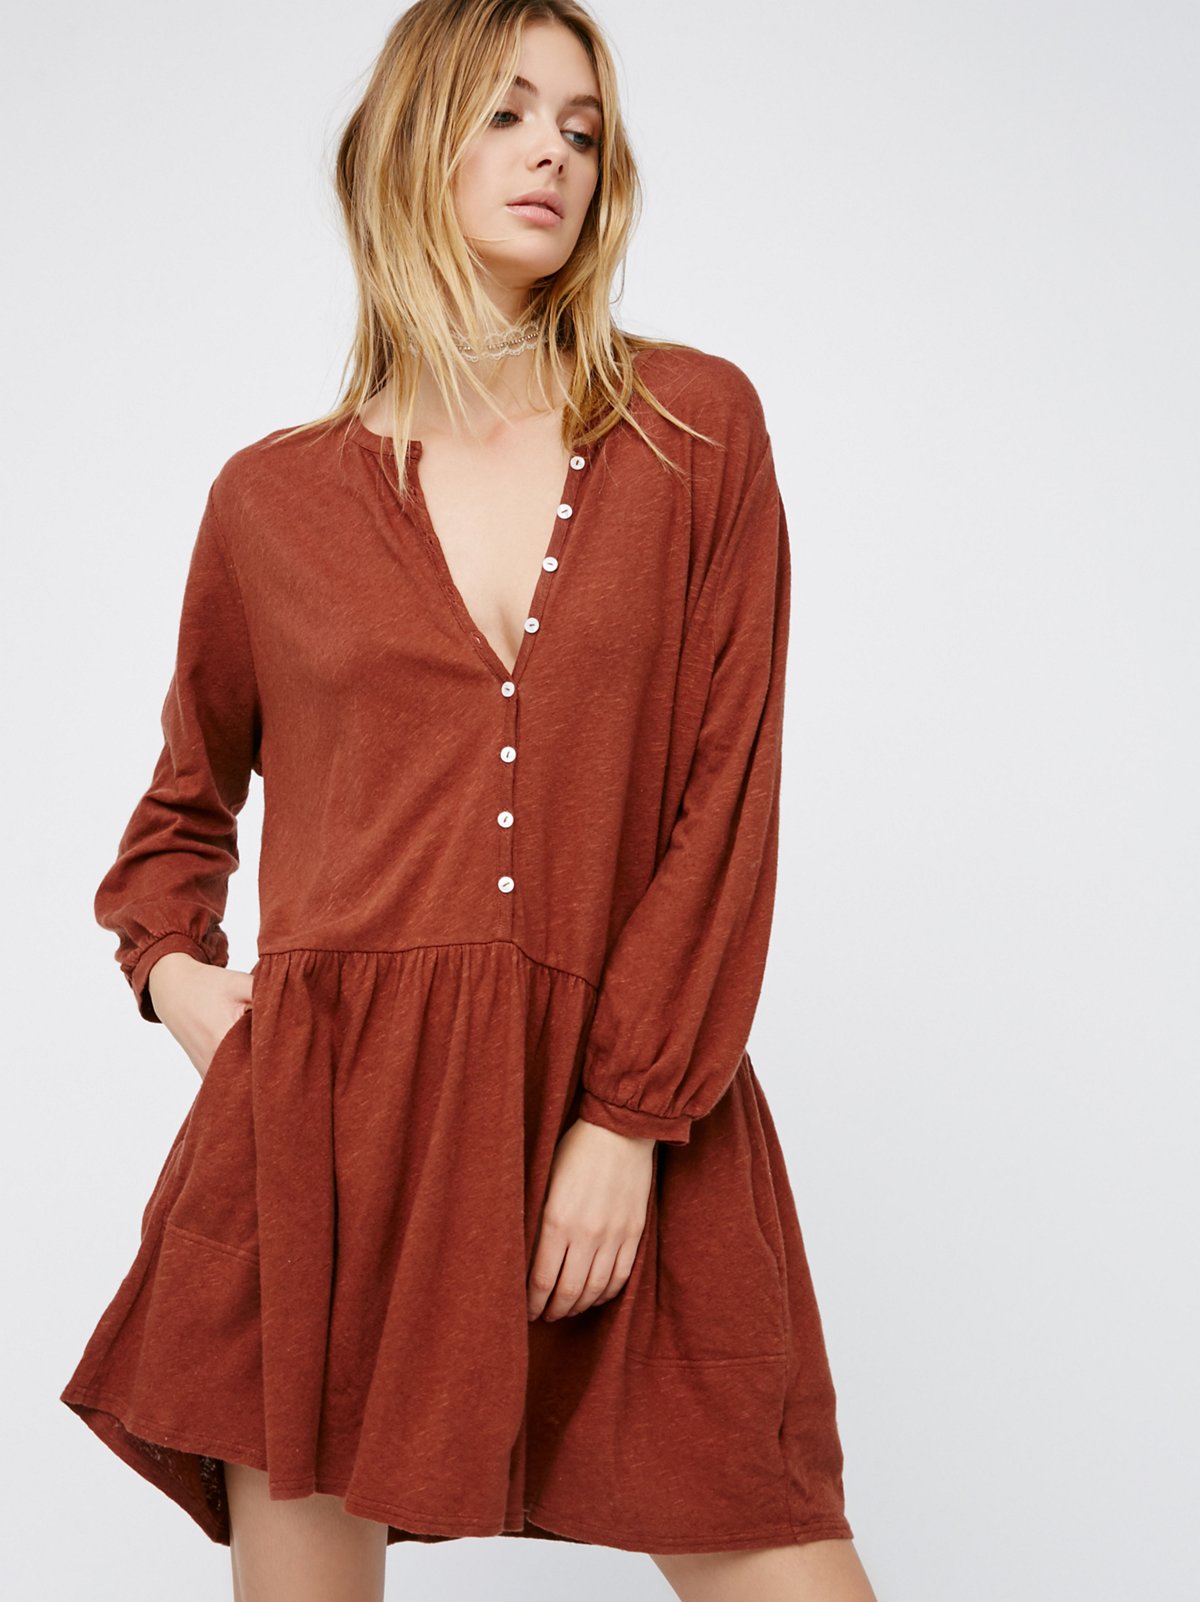 FP Beach Button Up Dress at Free People Clothing Boutique